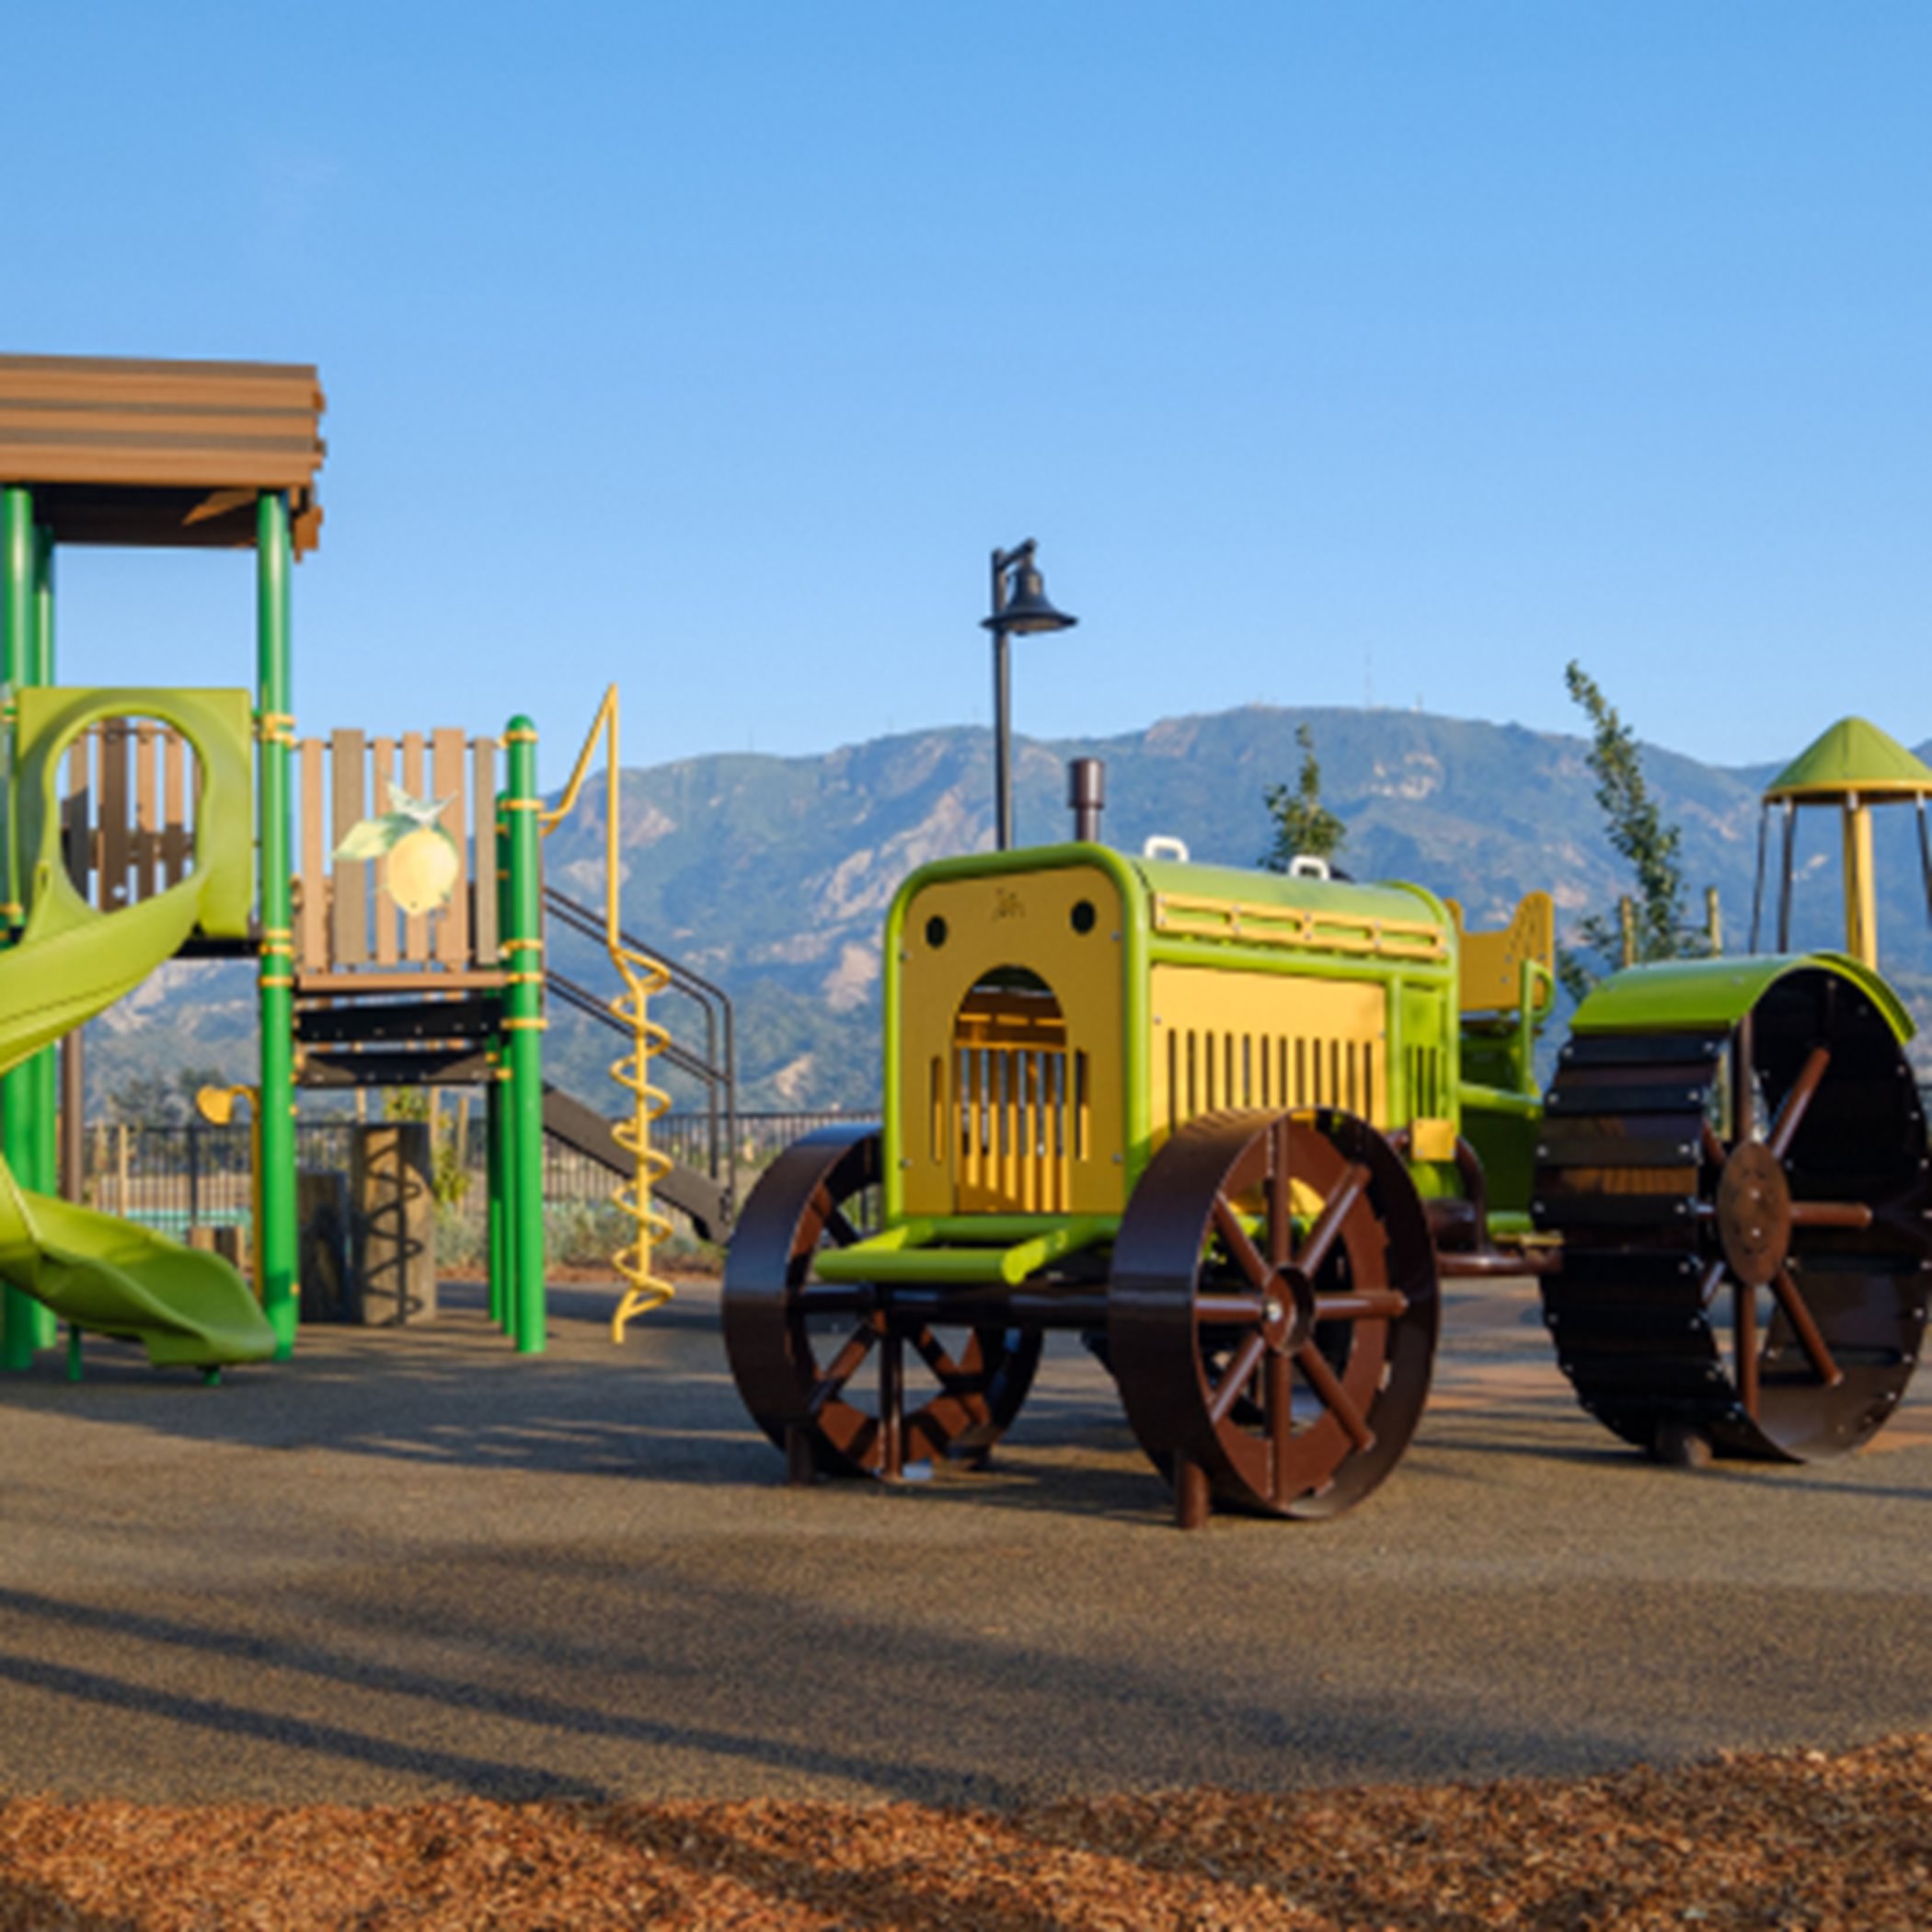 arvest at Limoneira slide, twisty firepole and a play tractor